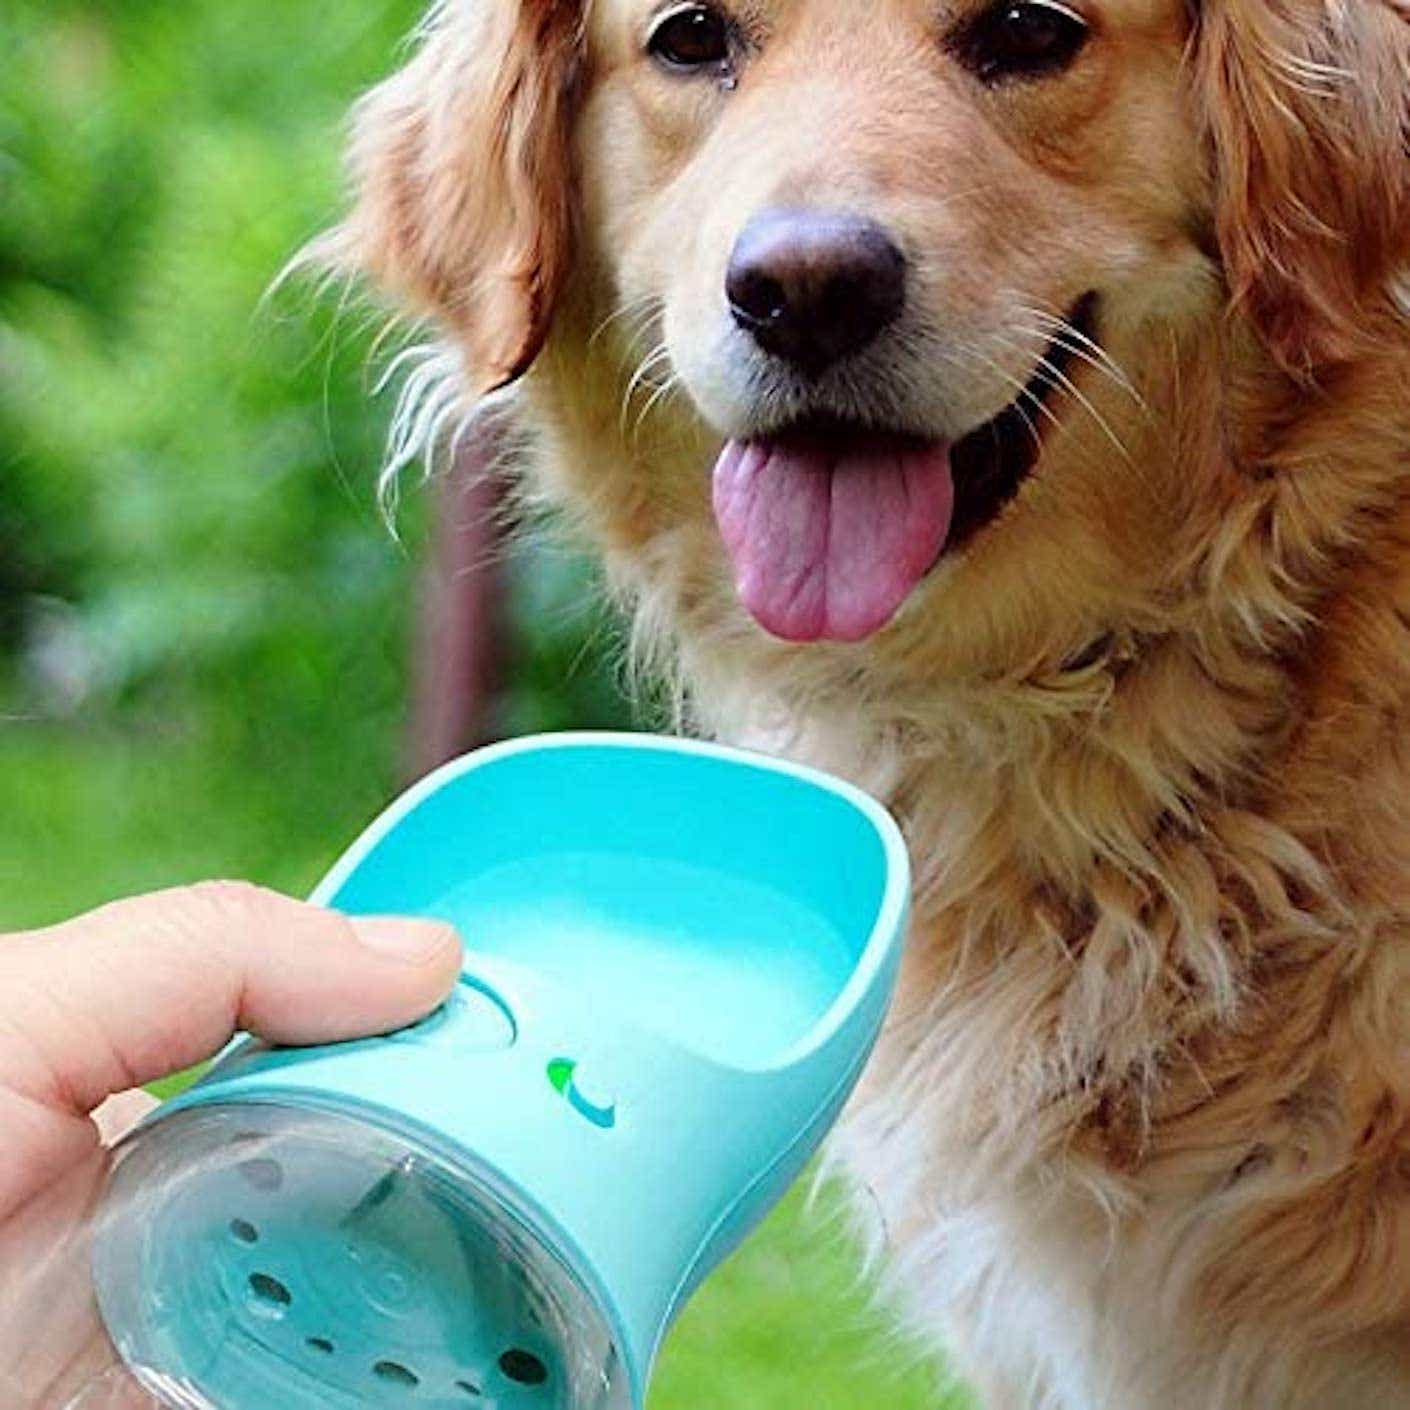 A shaggy golden dog looks like a dog water bottle that has a small bowl of water as a lid.